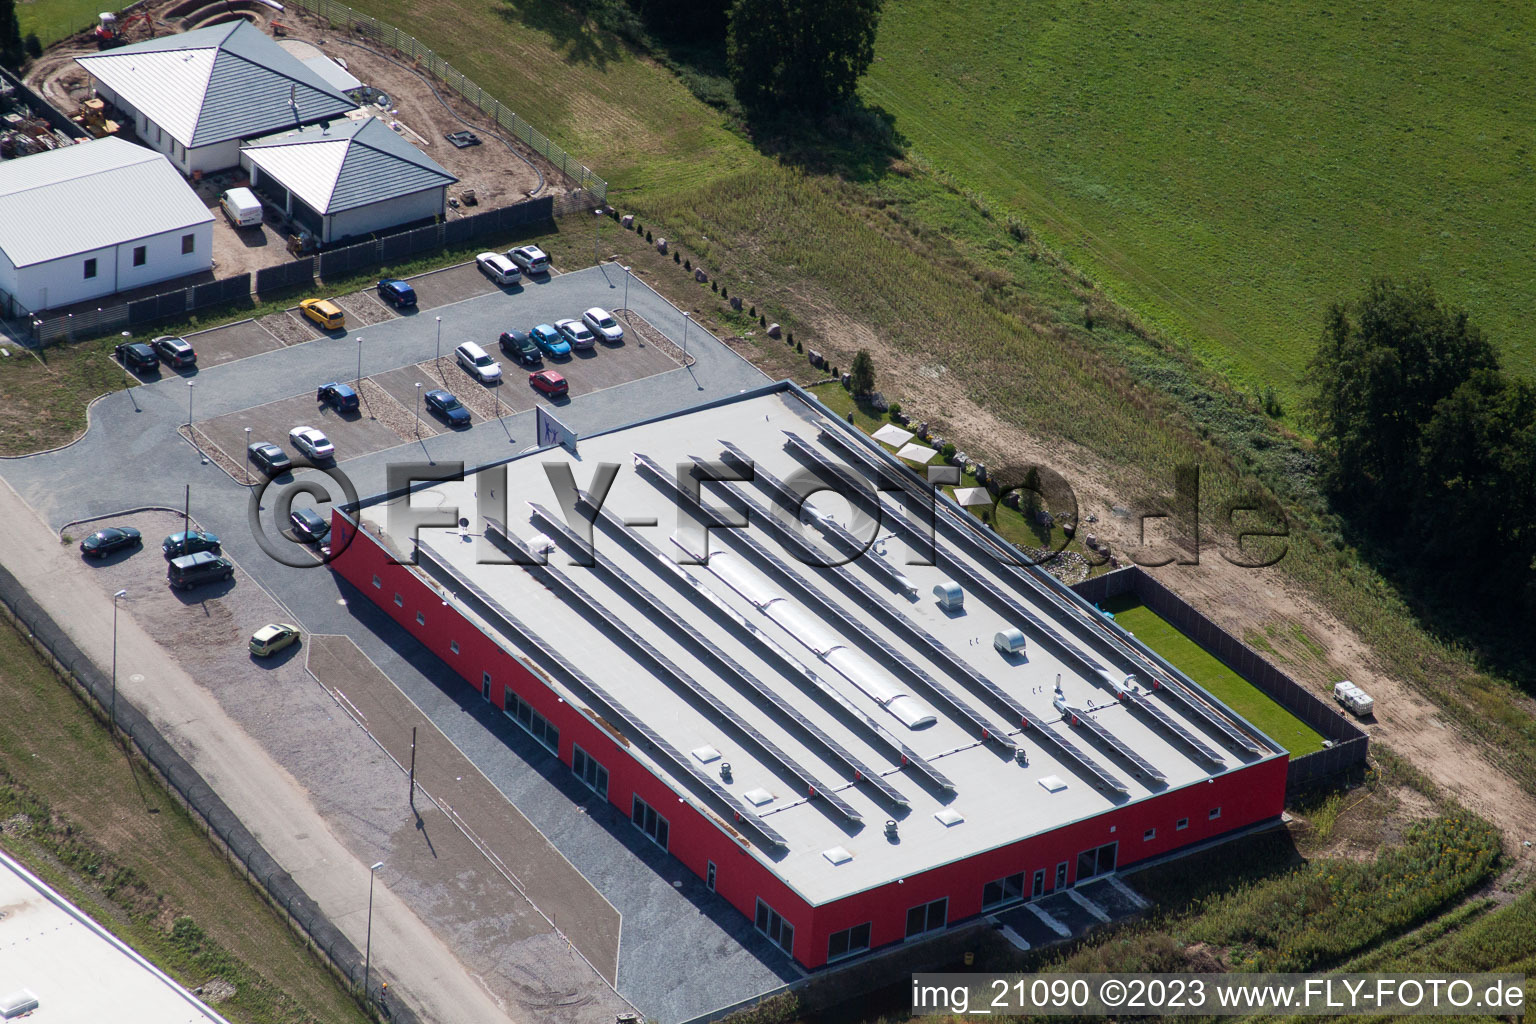 Aerial view of Bienwald Fitness World in the district Minderslachen in Kandel in the state Rhineland-Palatinate, Germany